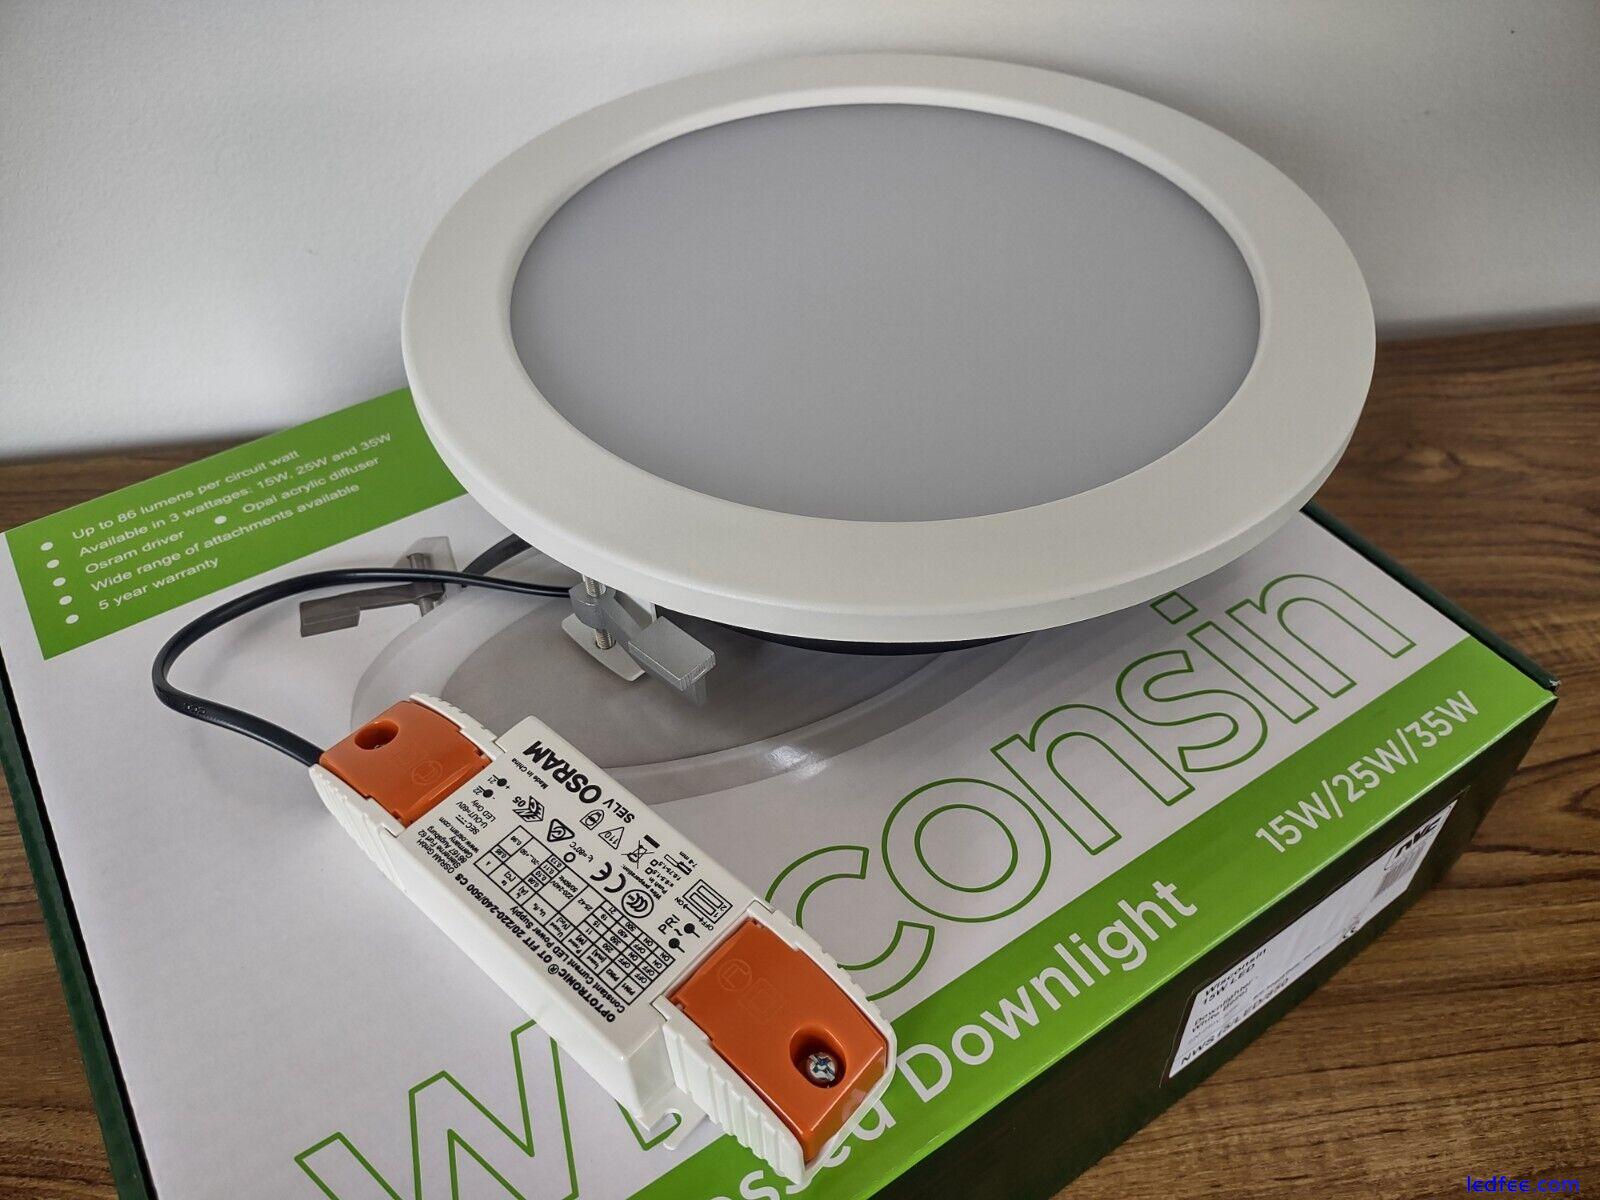 25w Ceiling Commercial LED Down Light  Recessed  Shop Cool White 240V 260mm Slim 2 